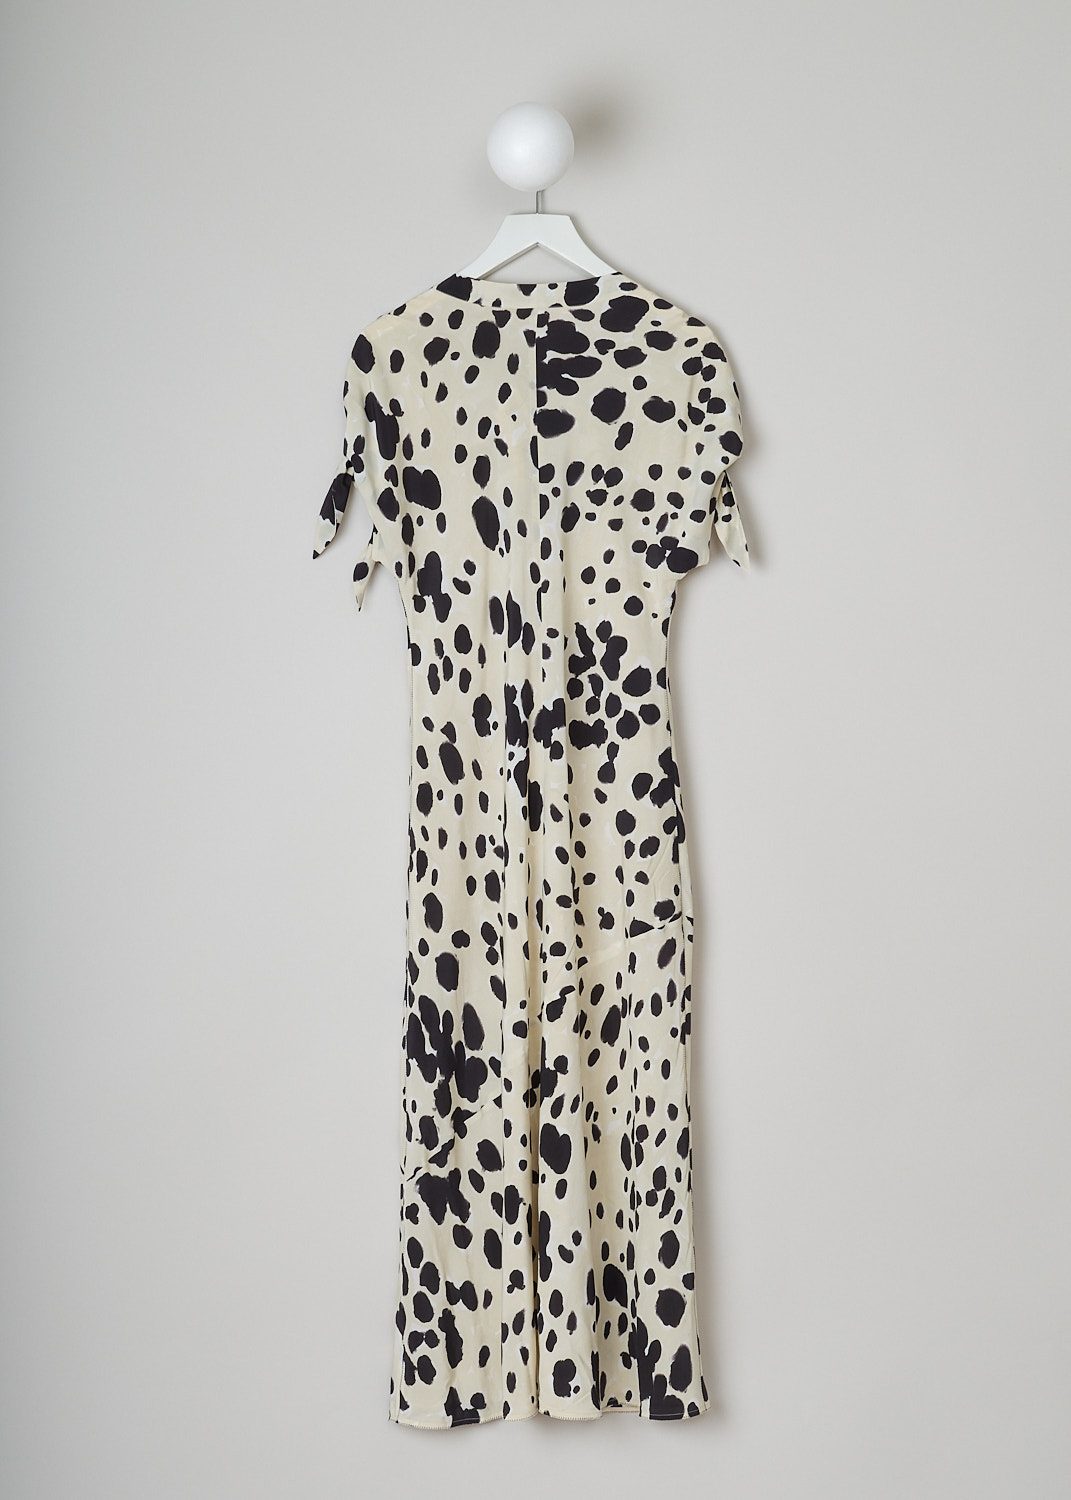 MARNI, POP DOTS SILK CRÊPE MAXI DRESS, ABMA0871U0_UTSF85_PDW13, White, Beige, Print, Back, This ivory silk crêpe maxi dress has an all-over pop dots print. The dress has a bow-tie neckline with a deep V. The short sleeves have tie cuffs. The long skirt flares out at the bottom. Zigzag stitching runs along the side seams and hem. The dress is fully lined.  
